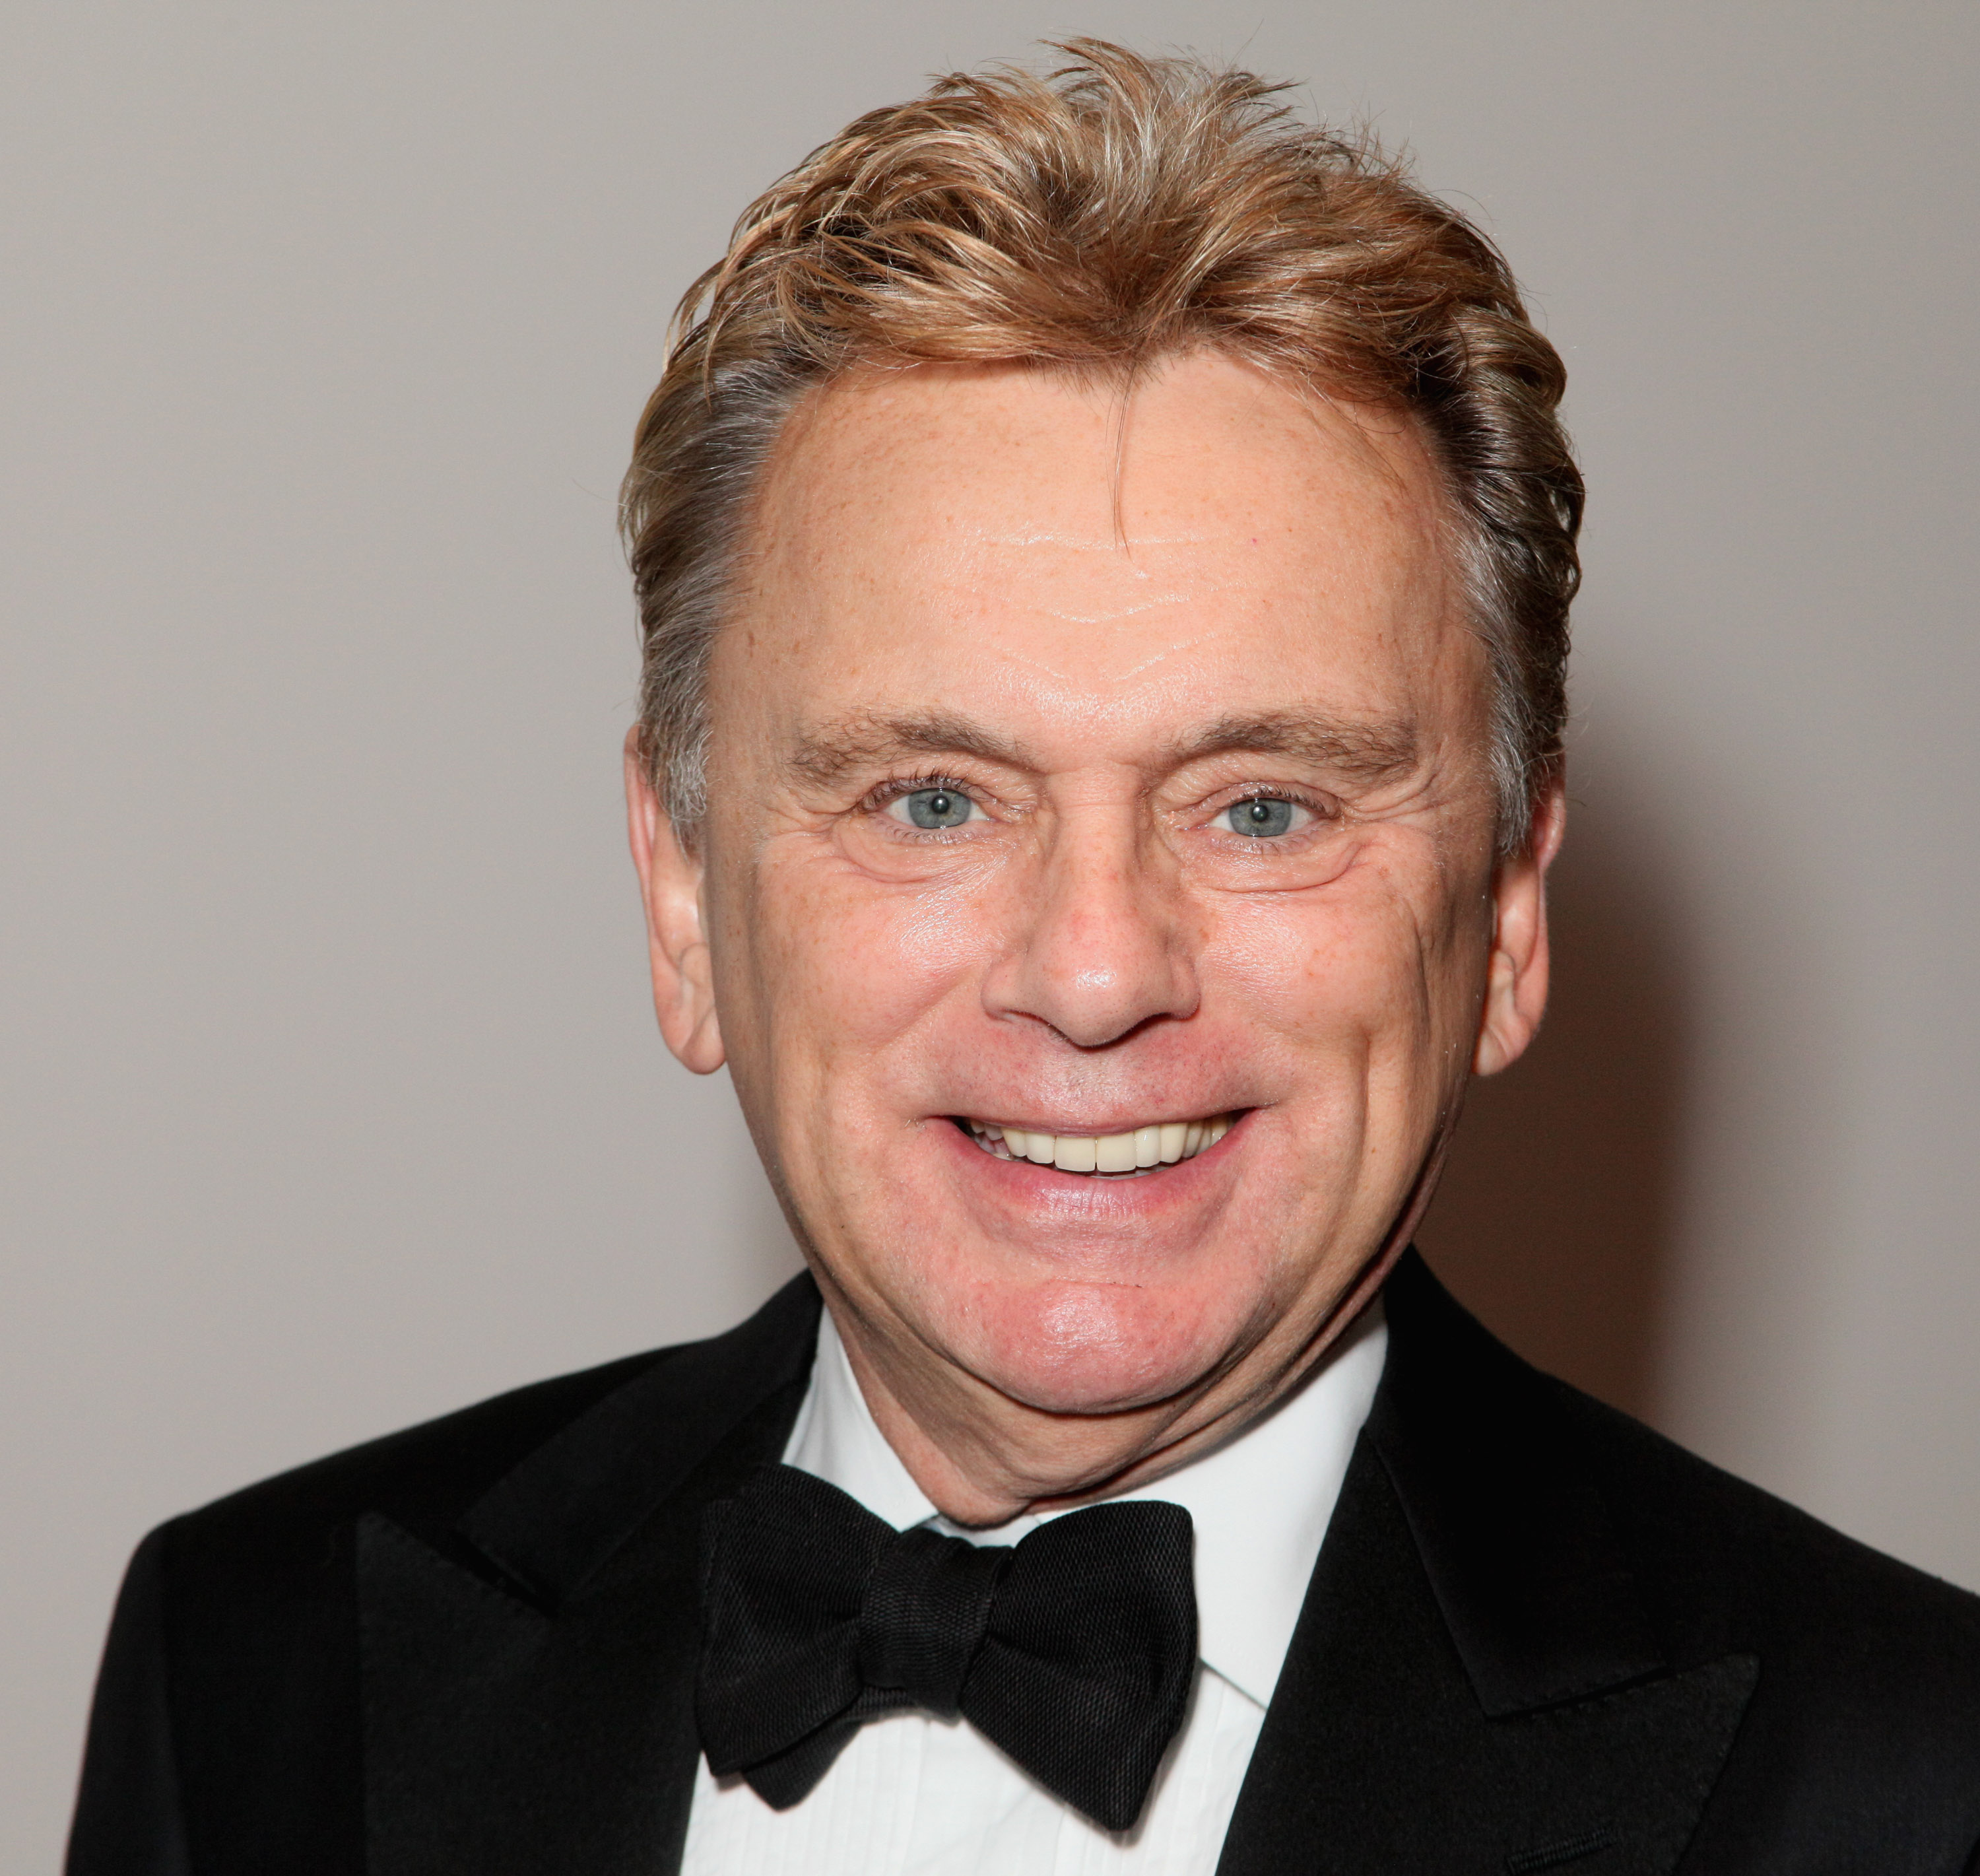 'Wheel of Fortune' host Pat Sajak attends Autry National Center 'Kick It Off & Kick It Up' 25th Anniversary Gala and V.I.P. Reception at The Autry National Center